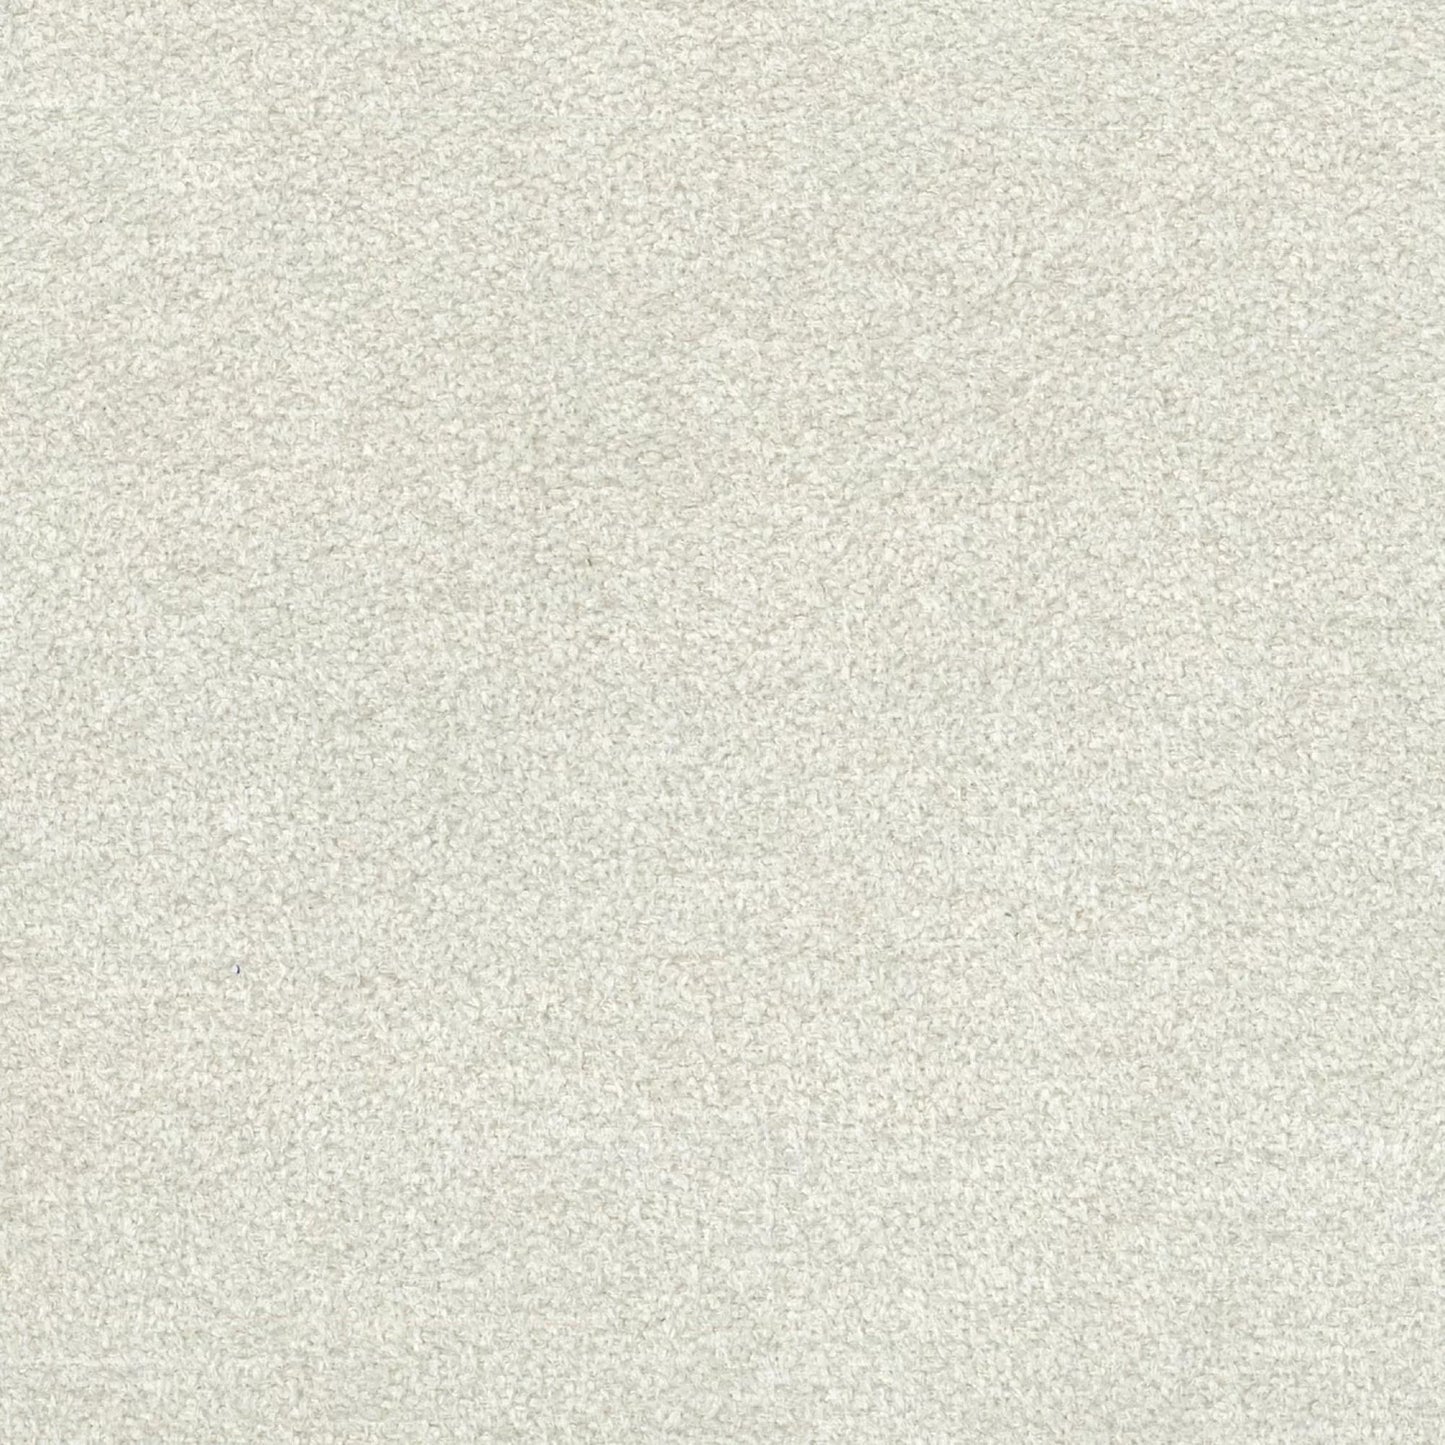 KINDRED SNOW FABRIC SAMPLE | VALUE COLLECTION